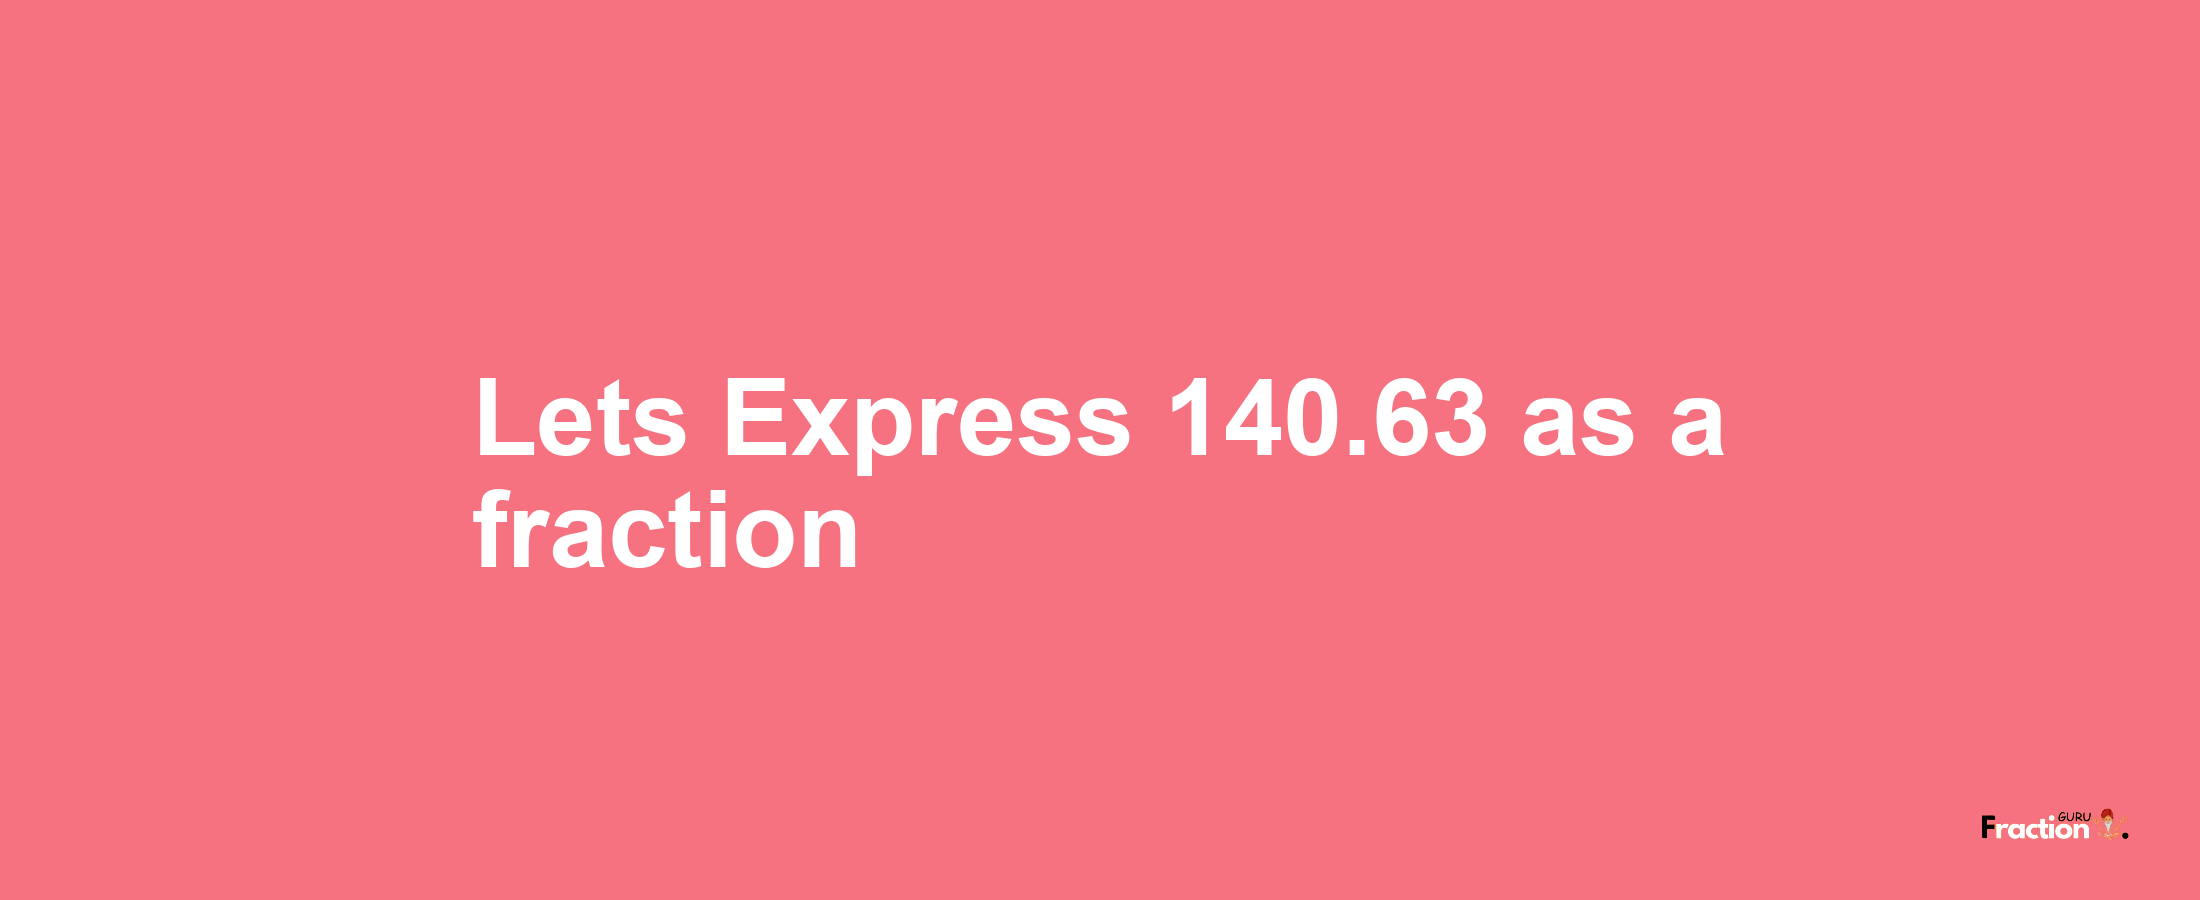 Lets Express 140.63 as afraction